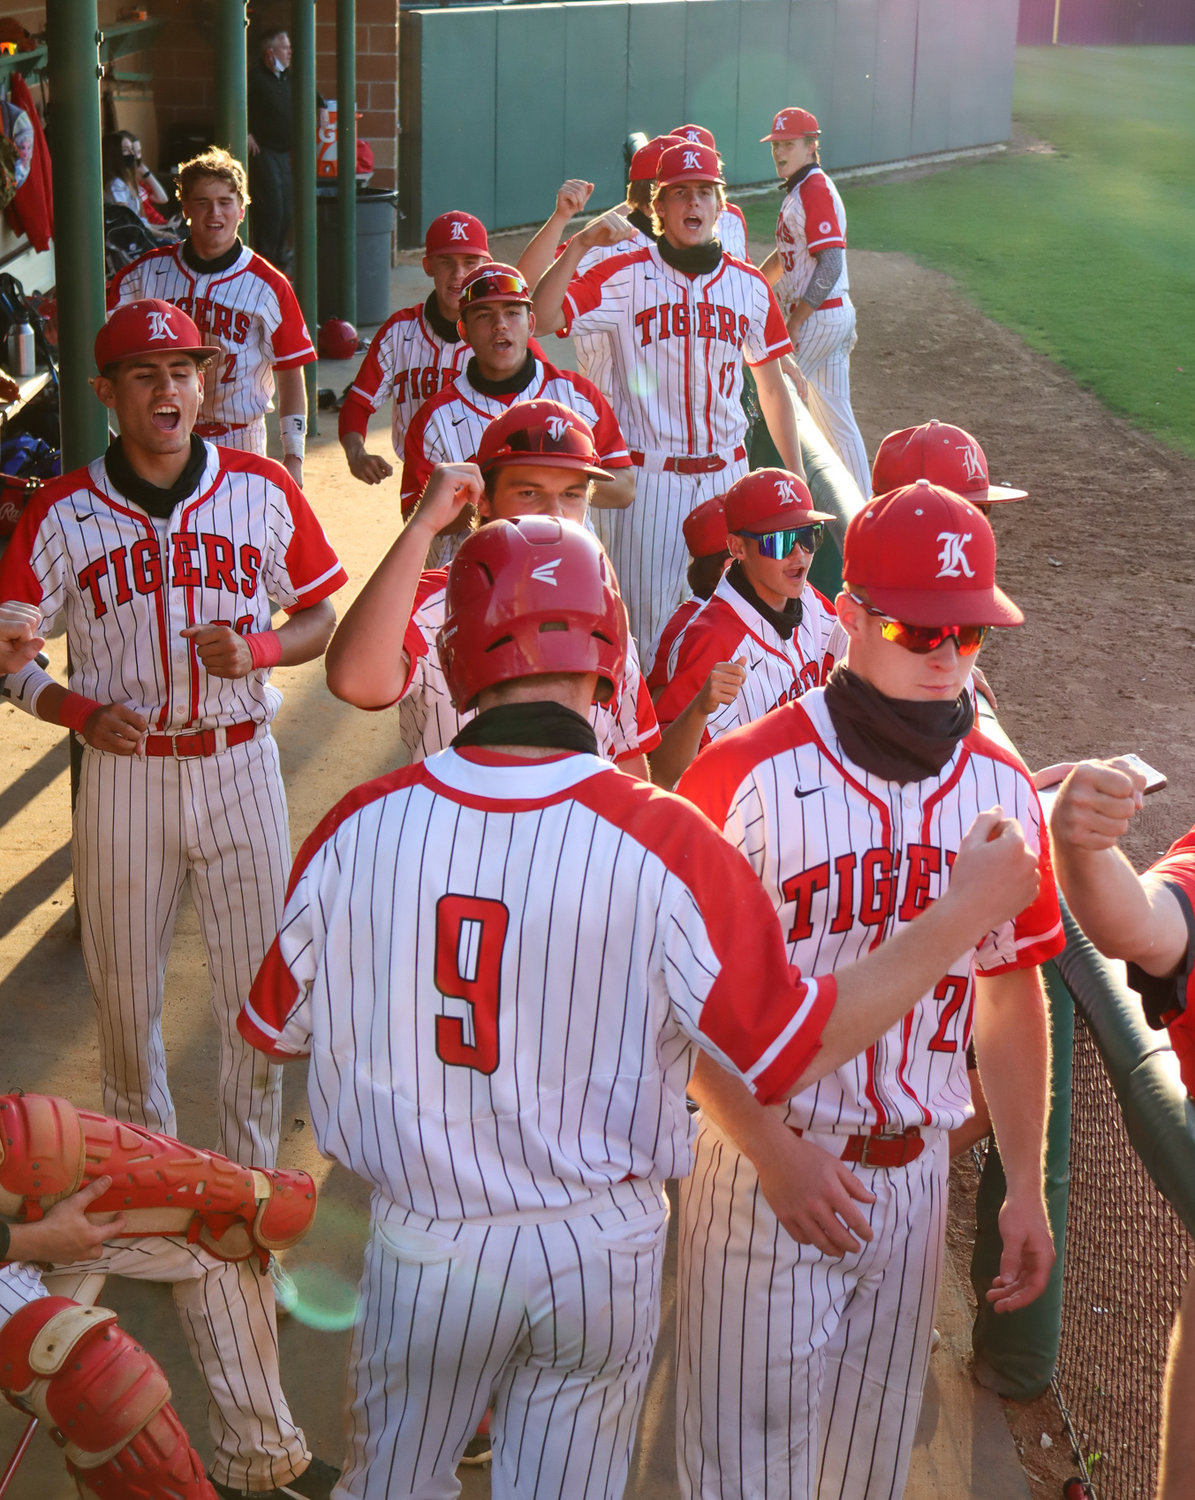 Katy players celebrate in the dugout during their game against Seven Lakes on Tuesday, April 20, at Katy High.